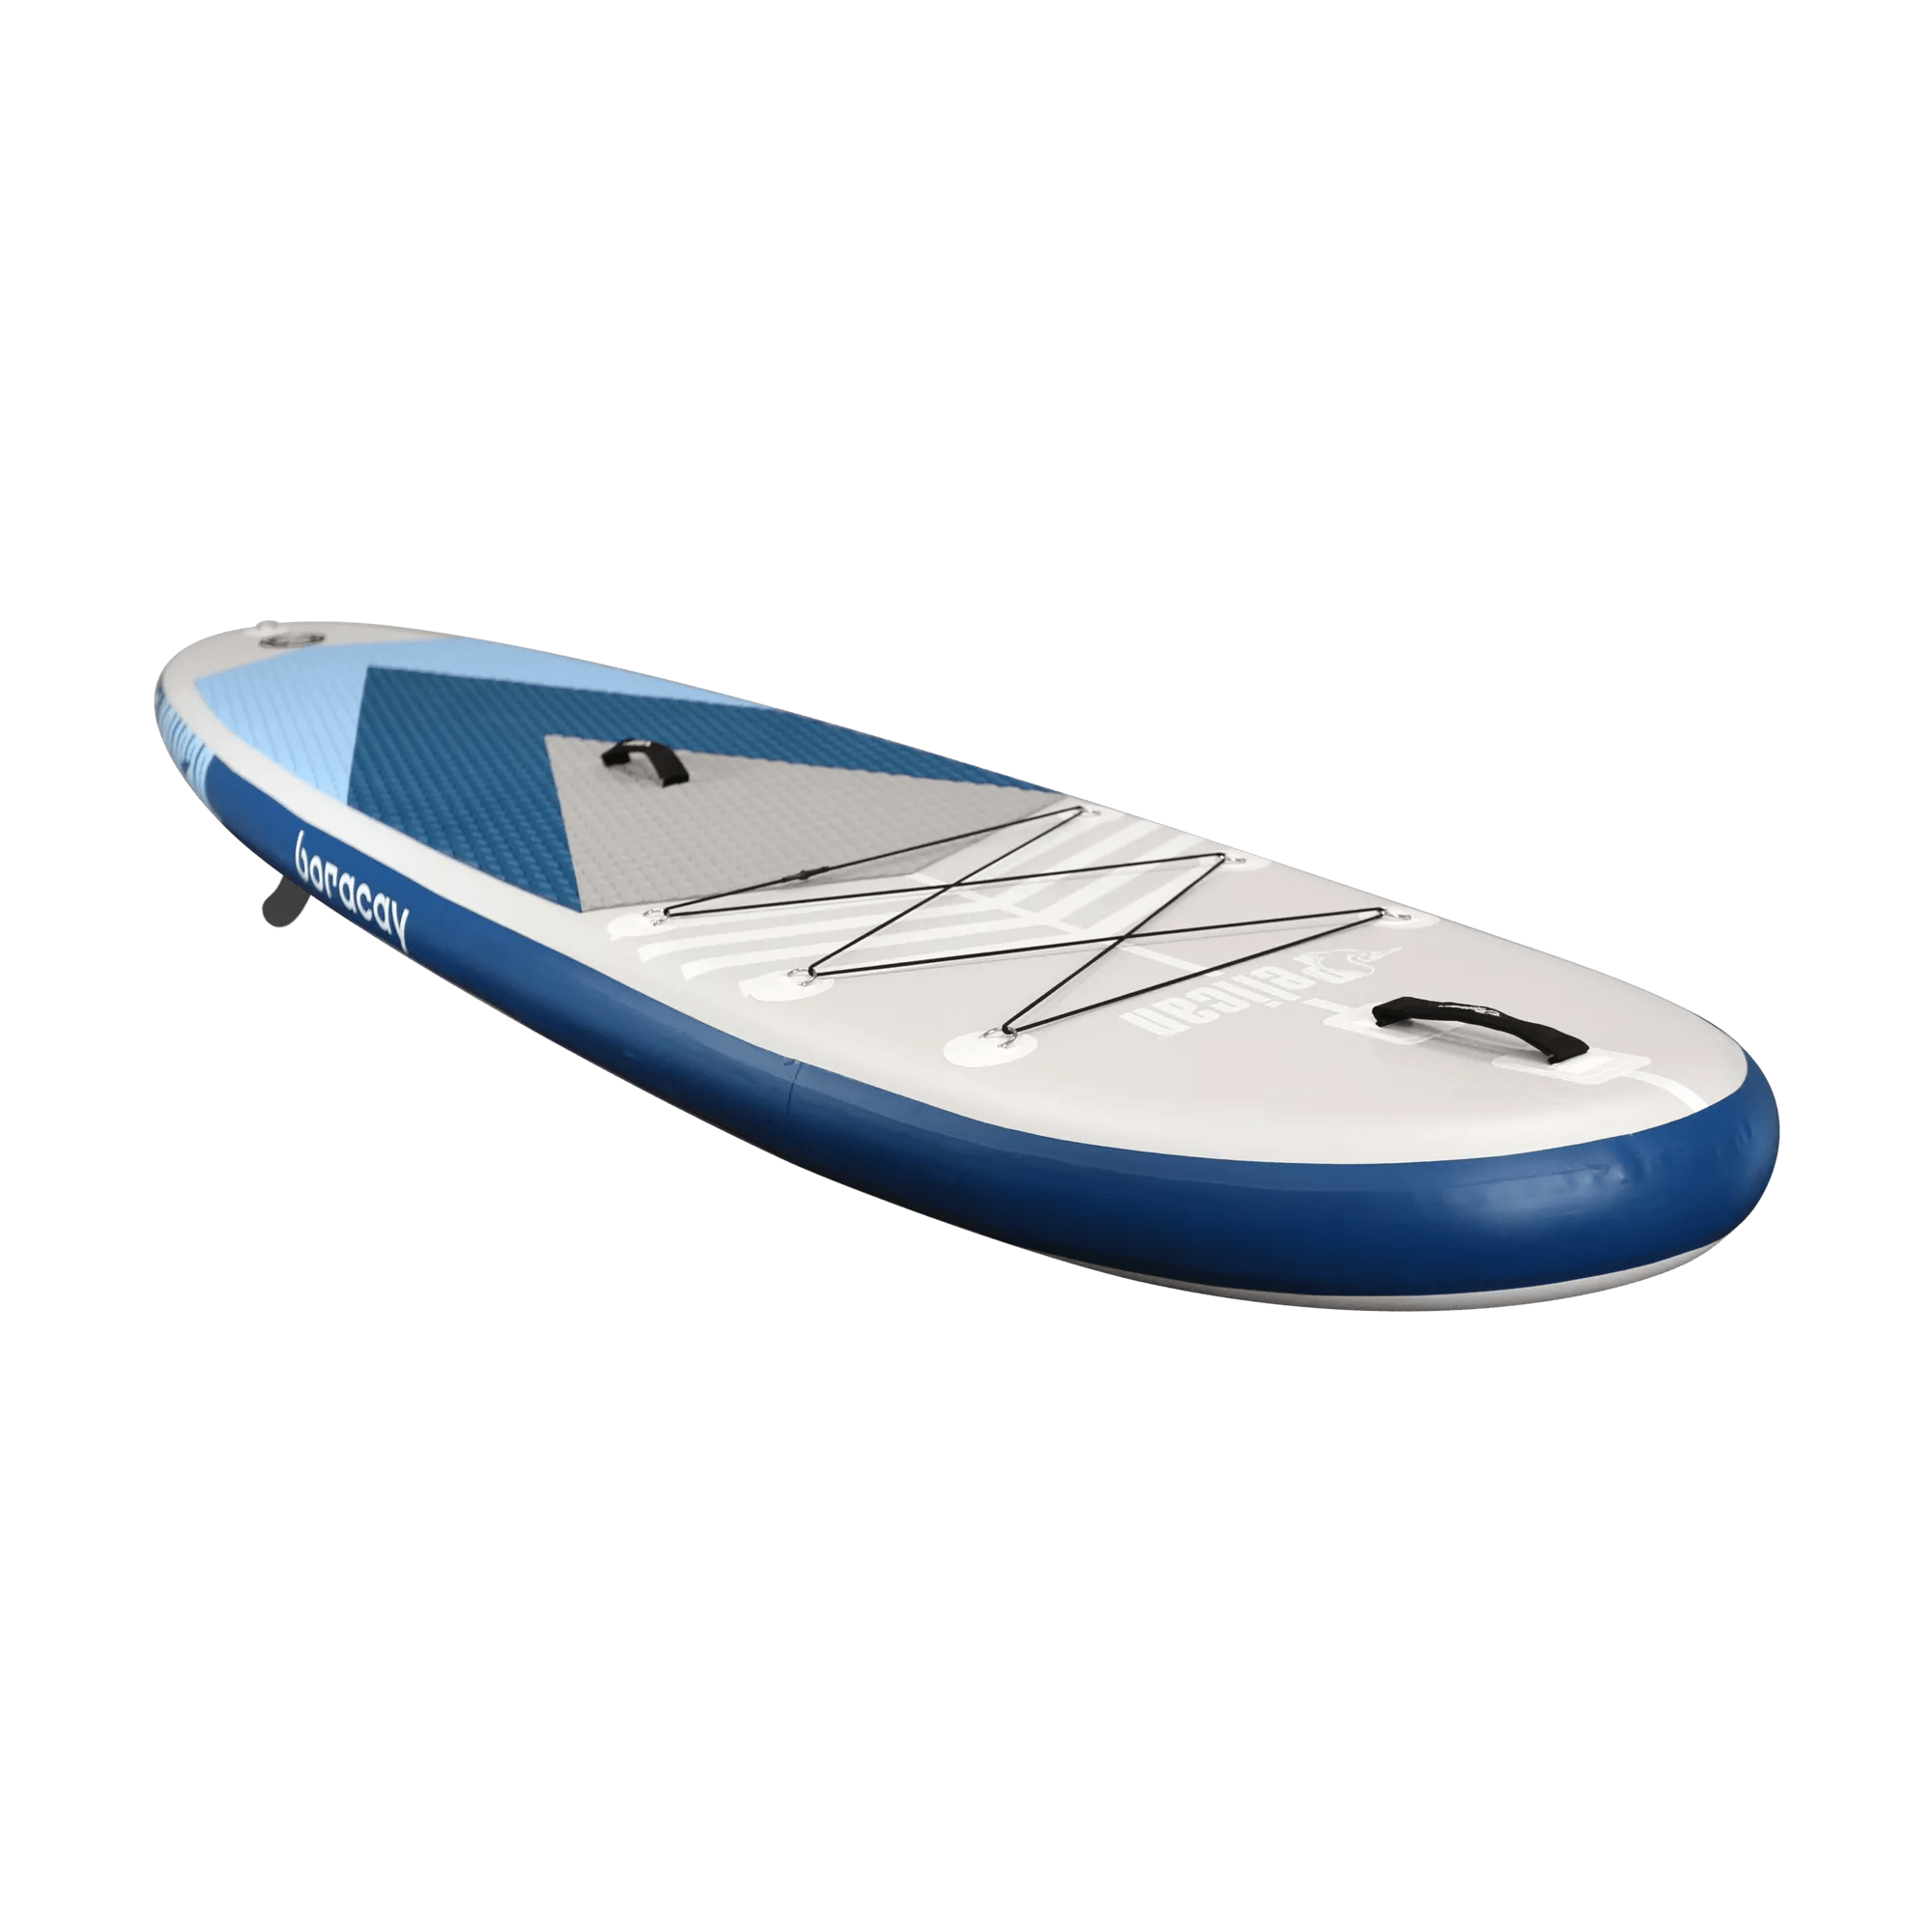 PELICAN - Boracay 10'4" Inflatable Paddle Board - Blue - FJG10P101 - ISO 